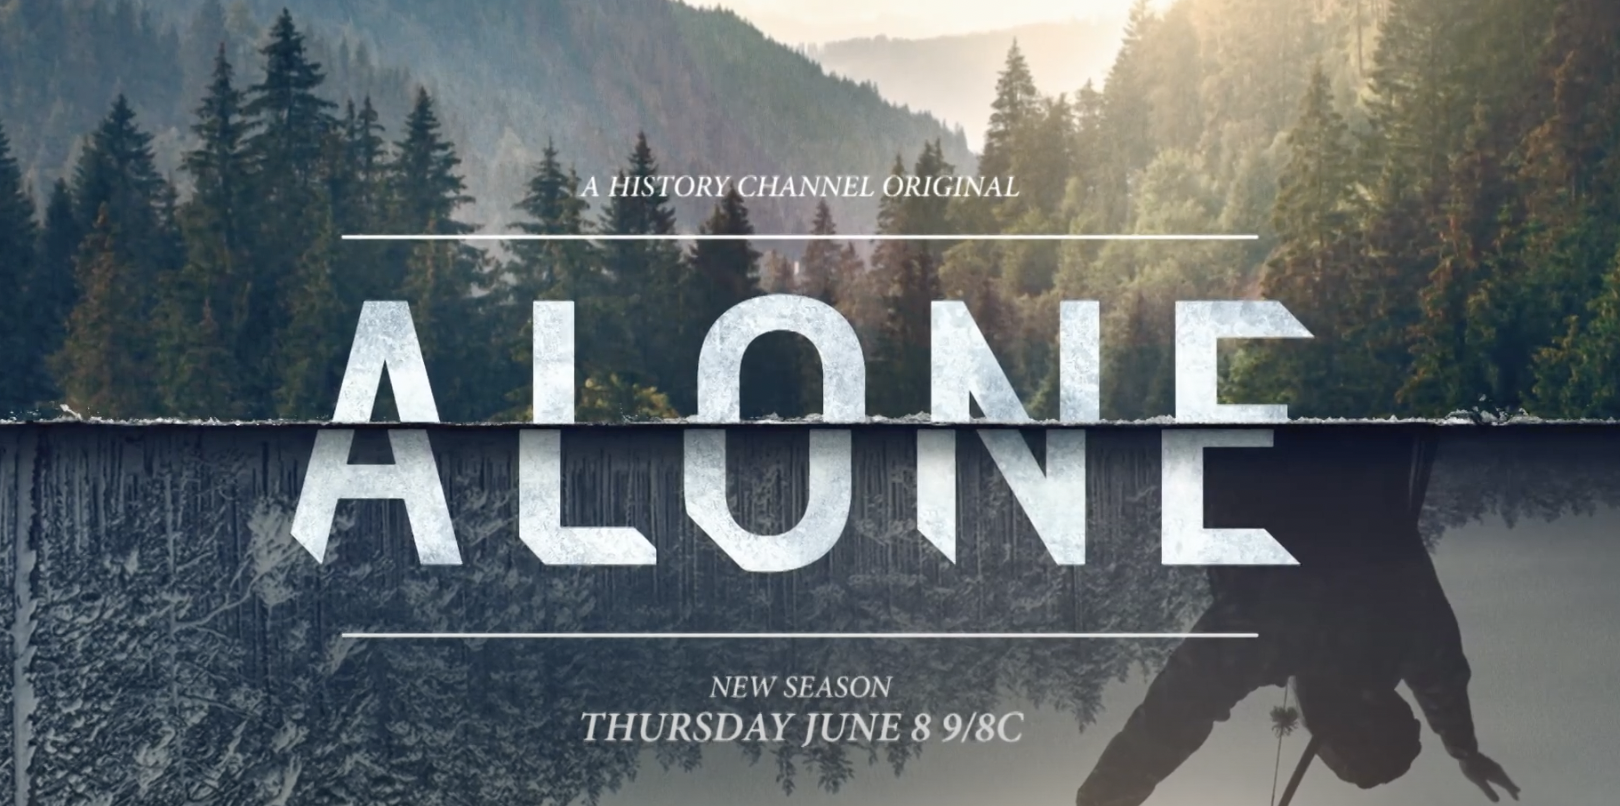 The Making of 'Alone,' the History Channel's Reality TV Show